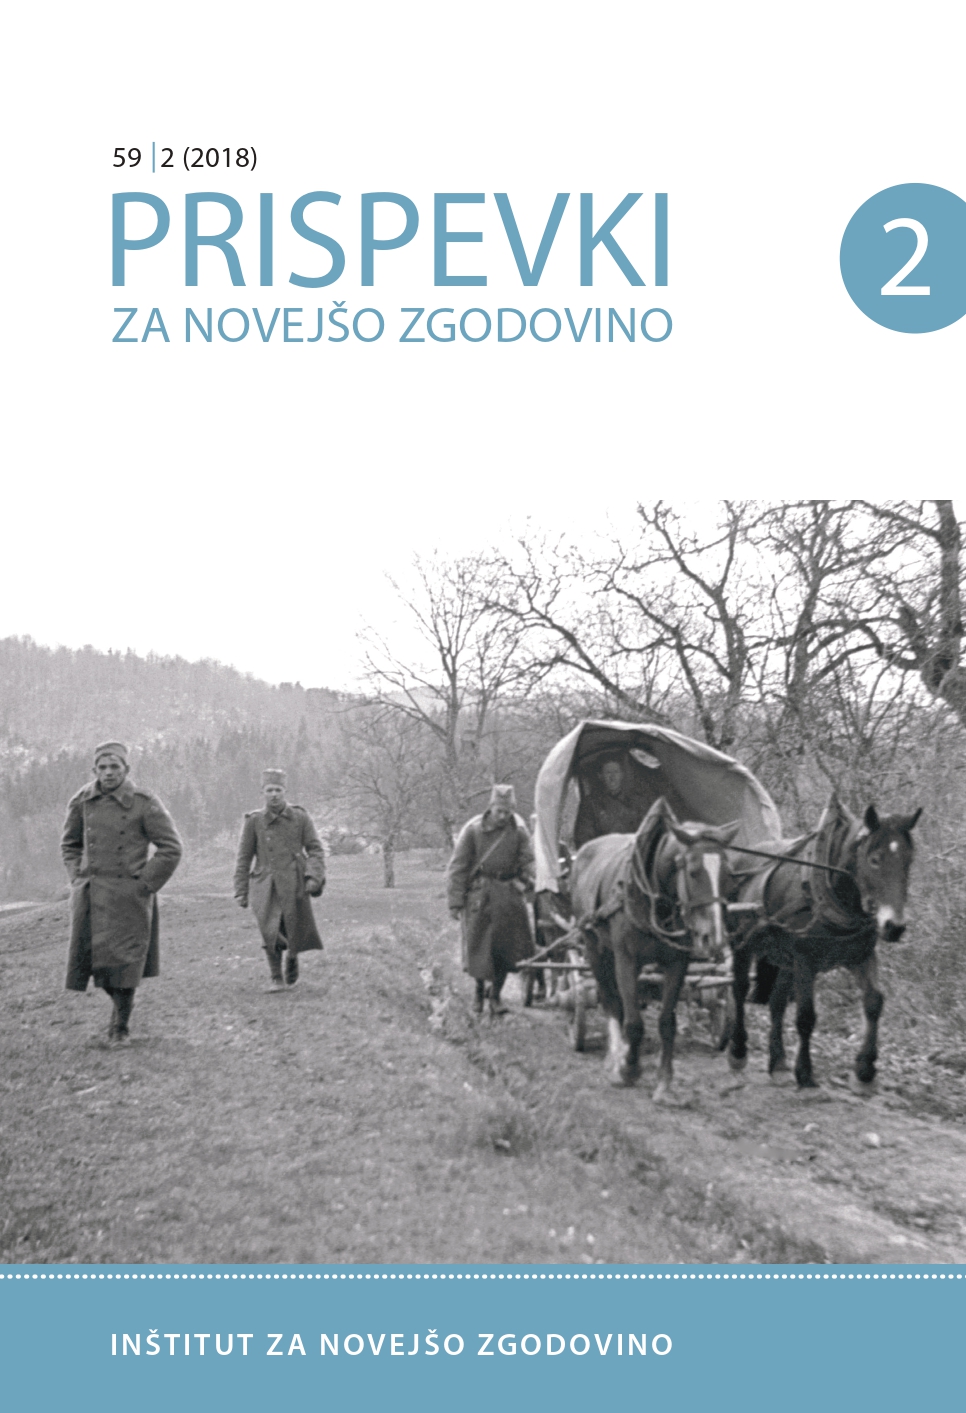 On the Use and Abuse of the Archive Materials, Kept by the Secret Services (The Example of a Story About Milovan Ilich, Published in Carinthian War Stories) Cover Image